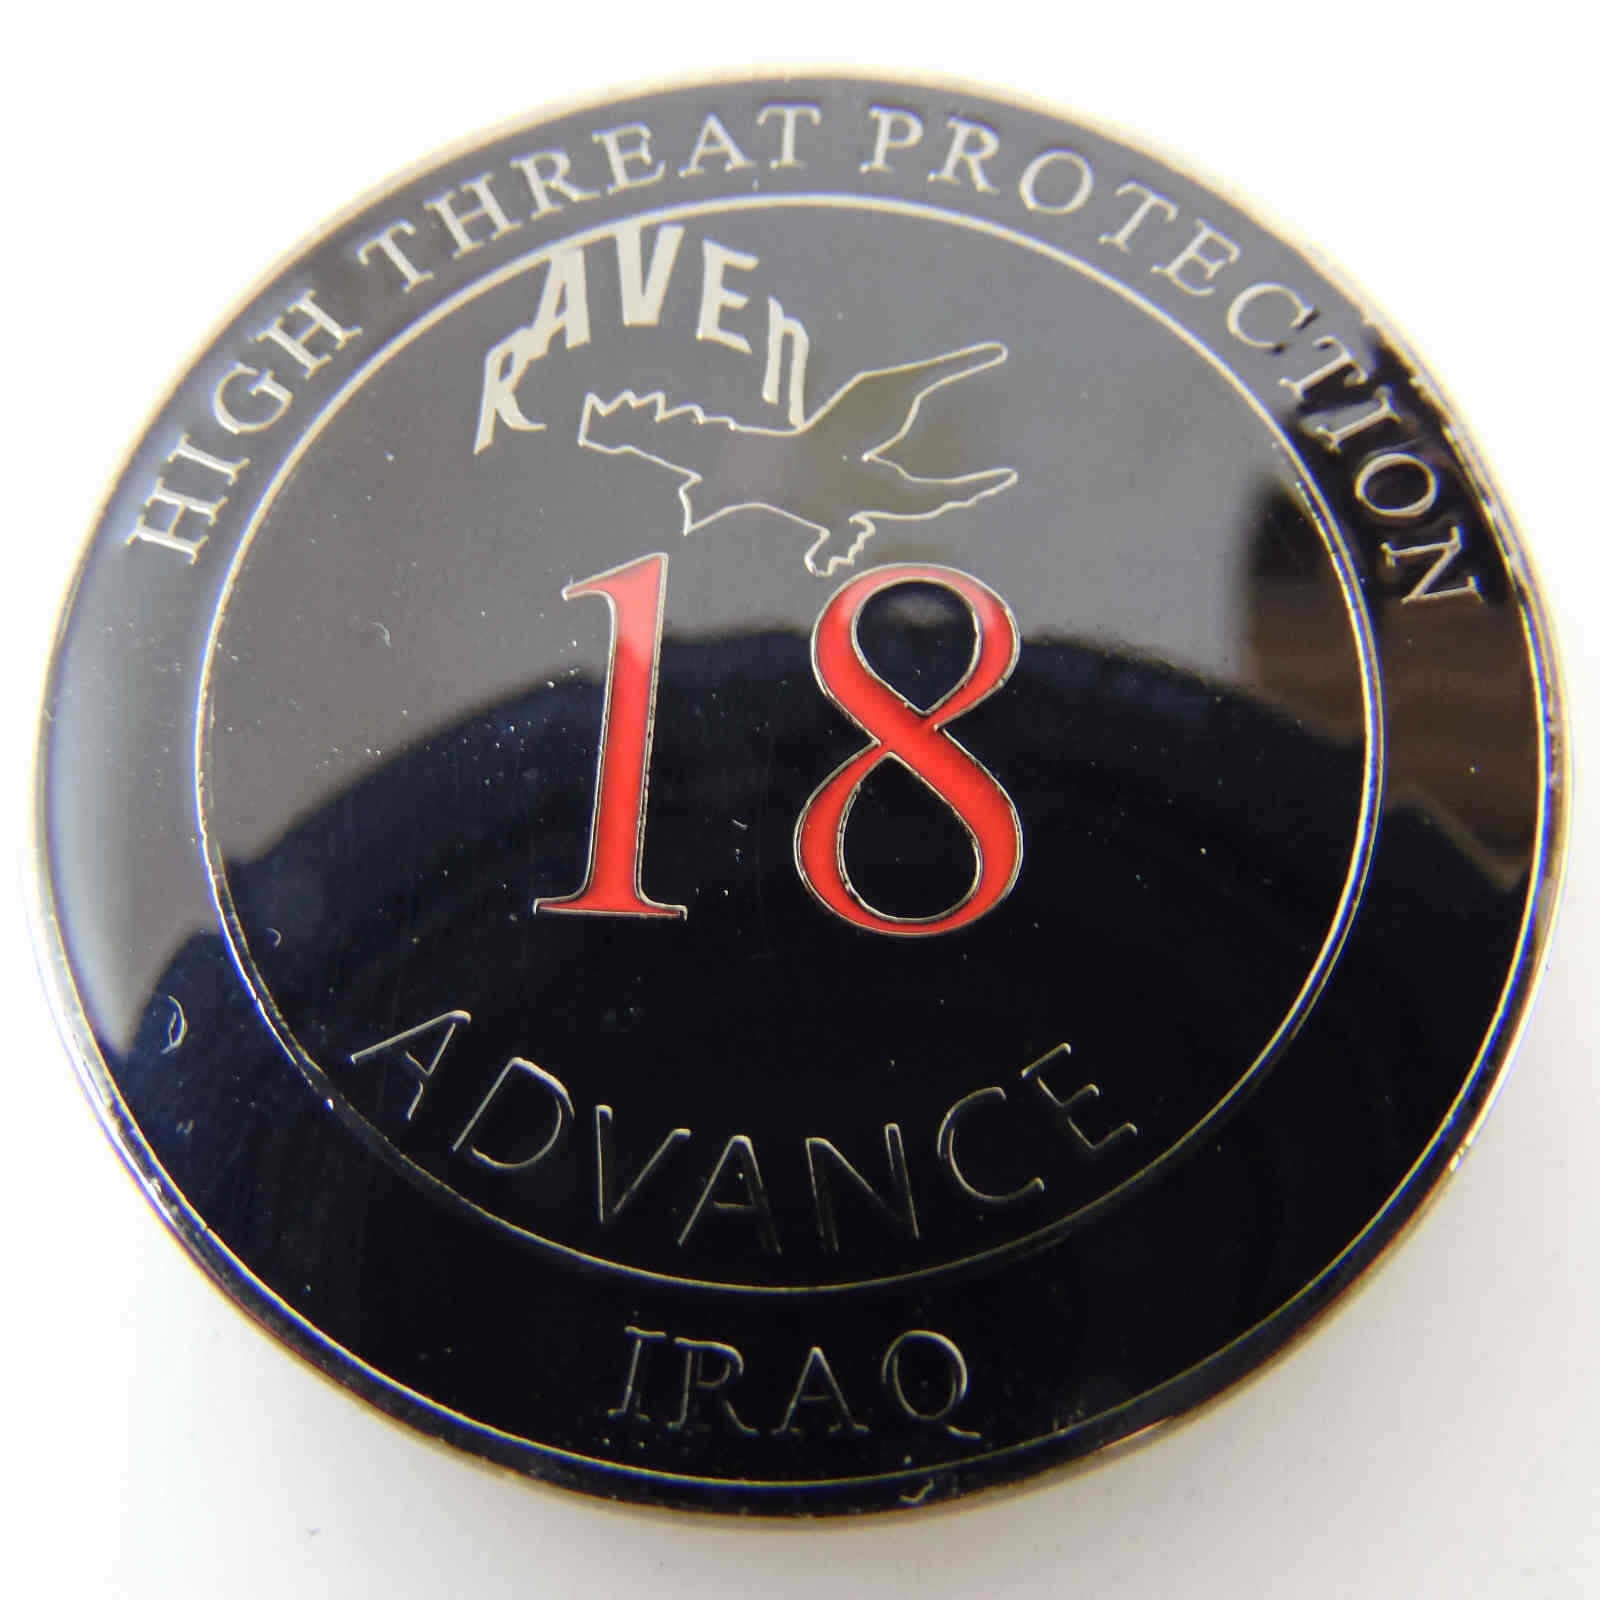 BLACK WATER HIGH THREAT PROTECTION IRAQ RAVEN 18 ADVANCE #8 CHALLENGE COIN